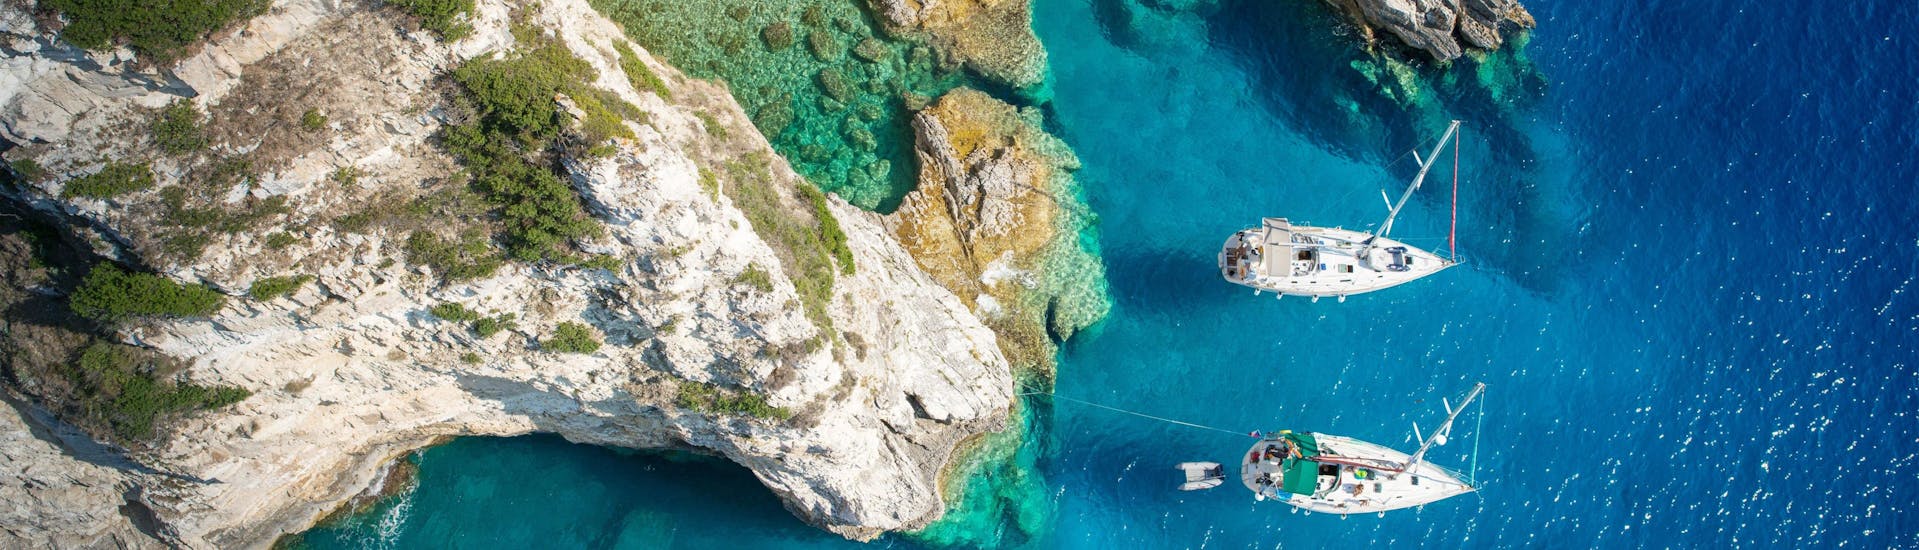 Aerial view of a cove on the island of Antipaxos where boats are moored, a popular destination in Greece for boat trips.